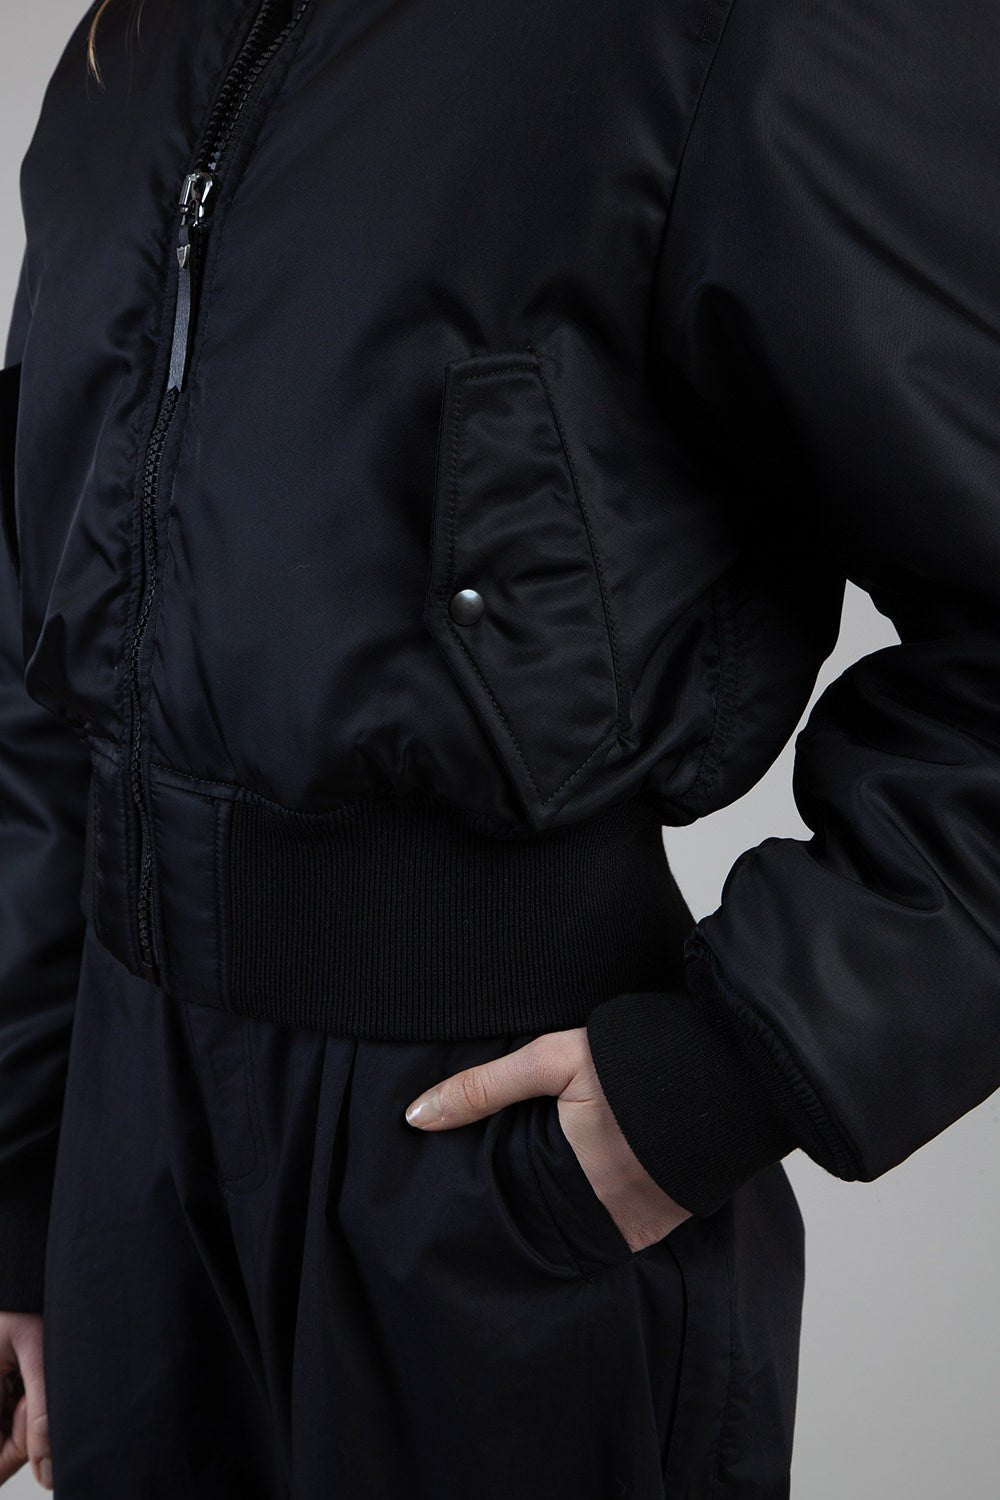 SUSPENDERS JACKET Crop bomber jacket, zip closure and front pockets. Composition 100% Nylon HTC LOS ANGELES